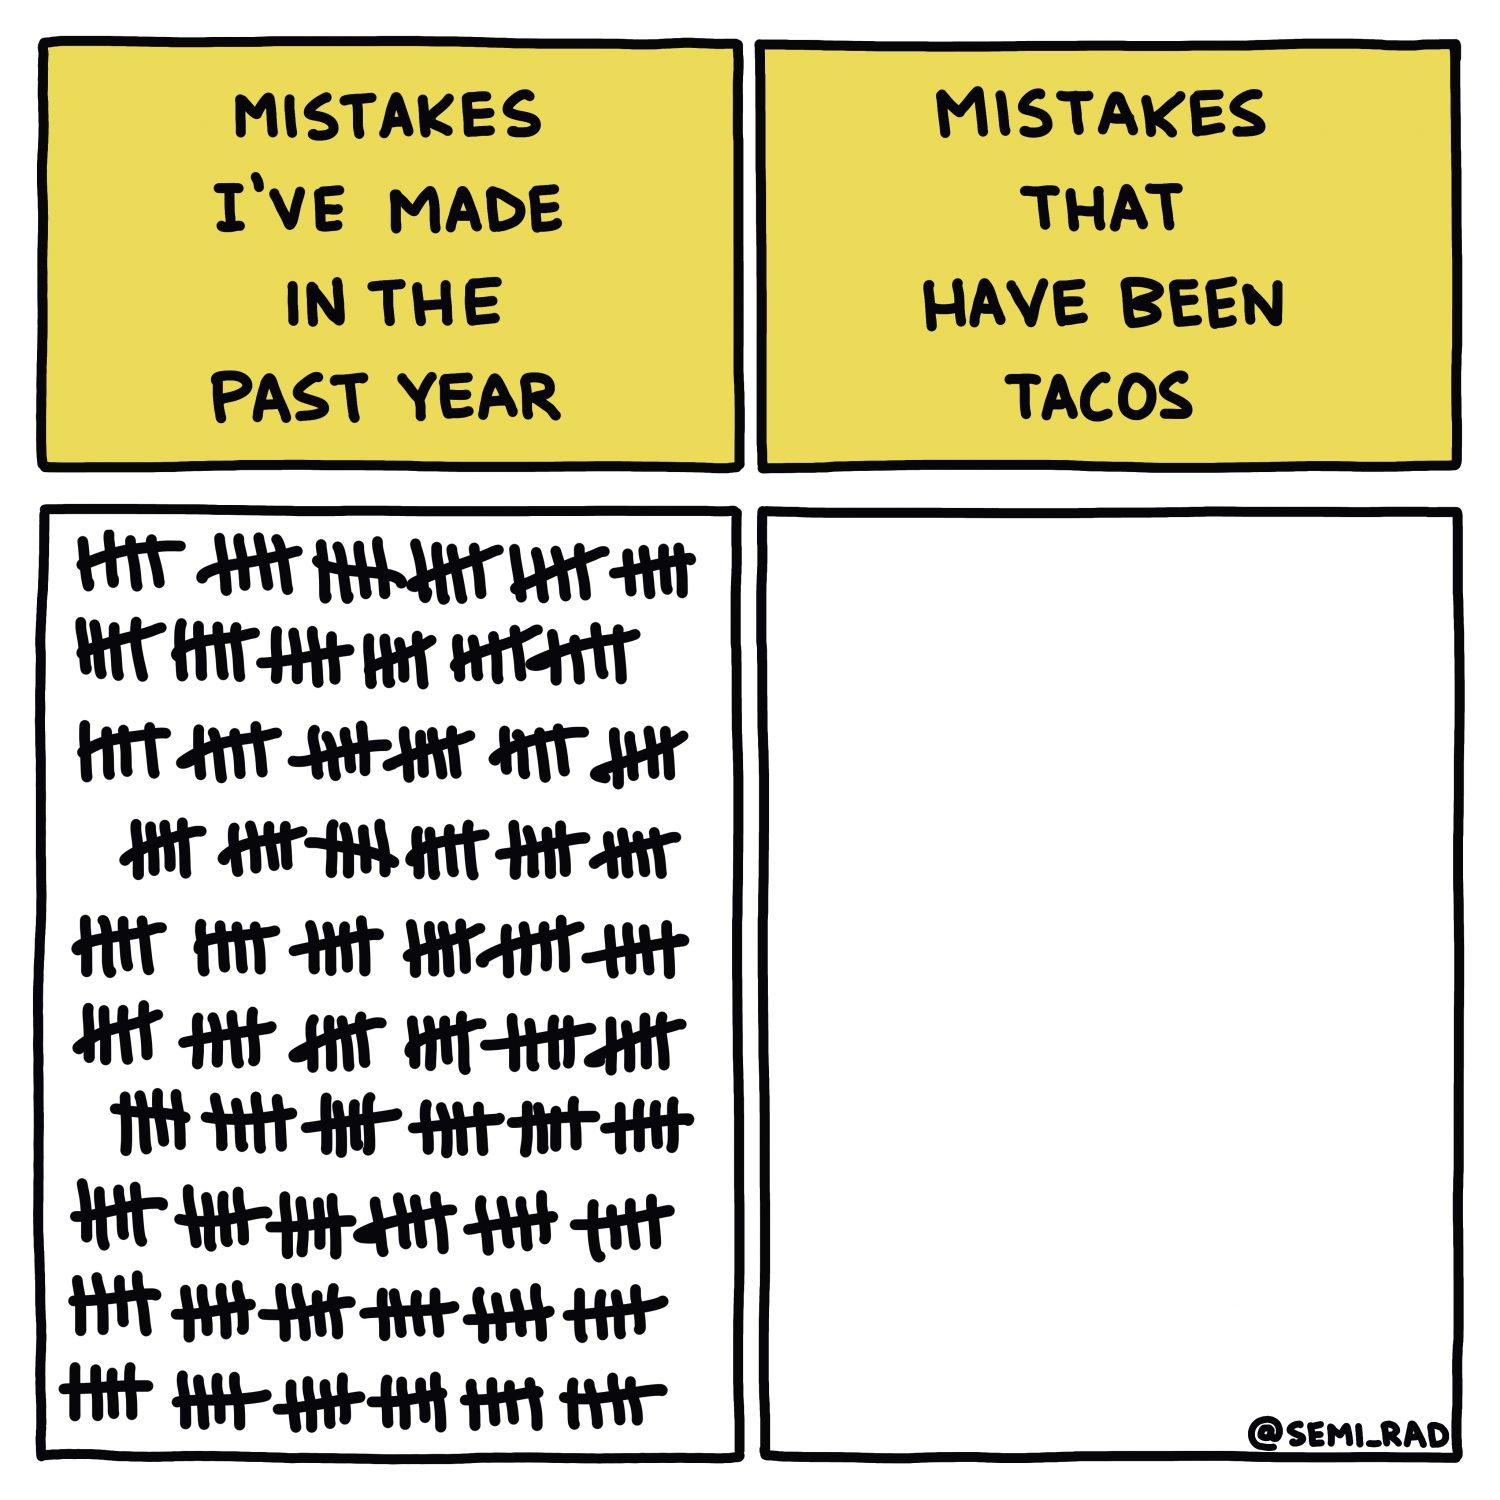 semi-rad chart: mistakes I've made in the past year vs. mistakes that have been tacos